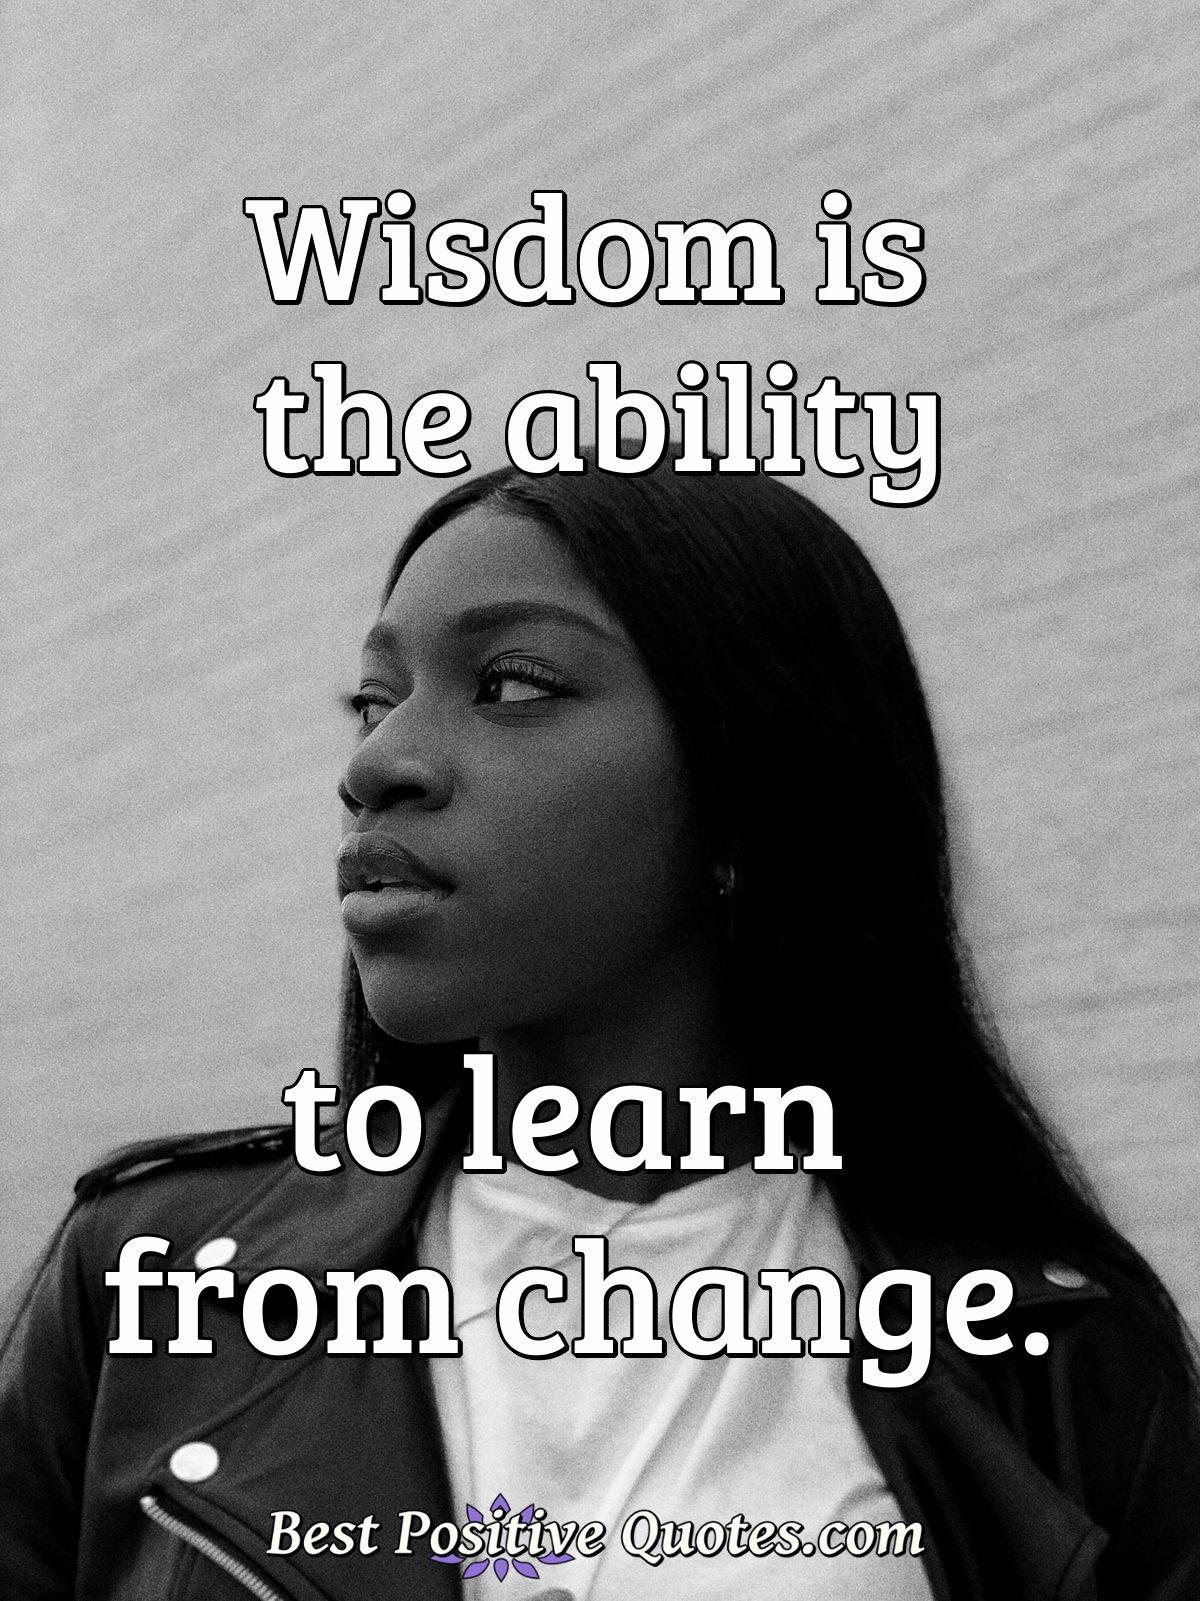 Wisdom is the ability to learn from change. - Anonymous